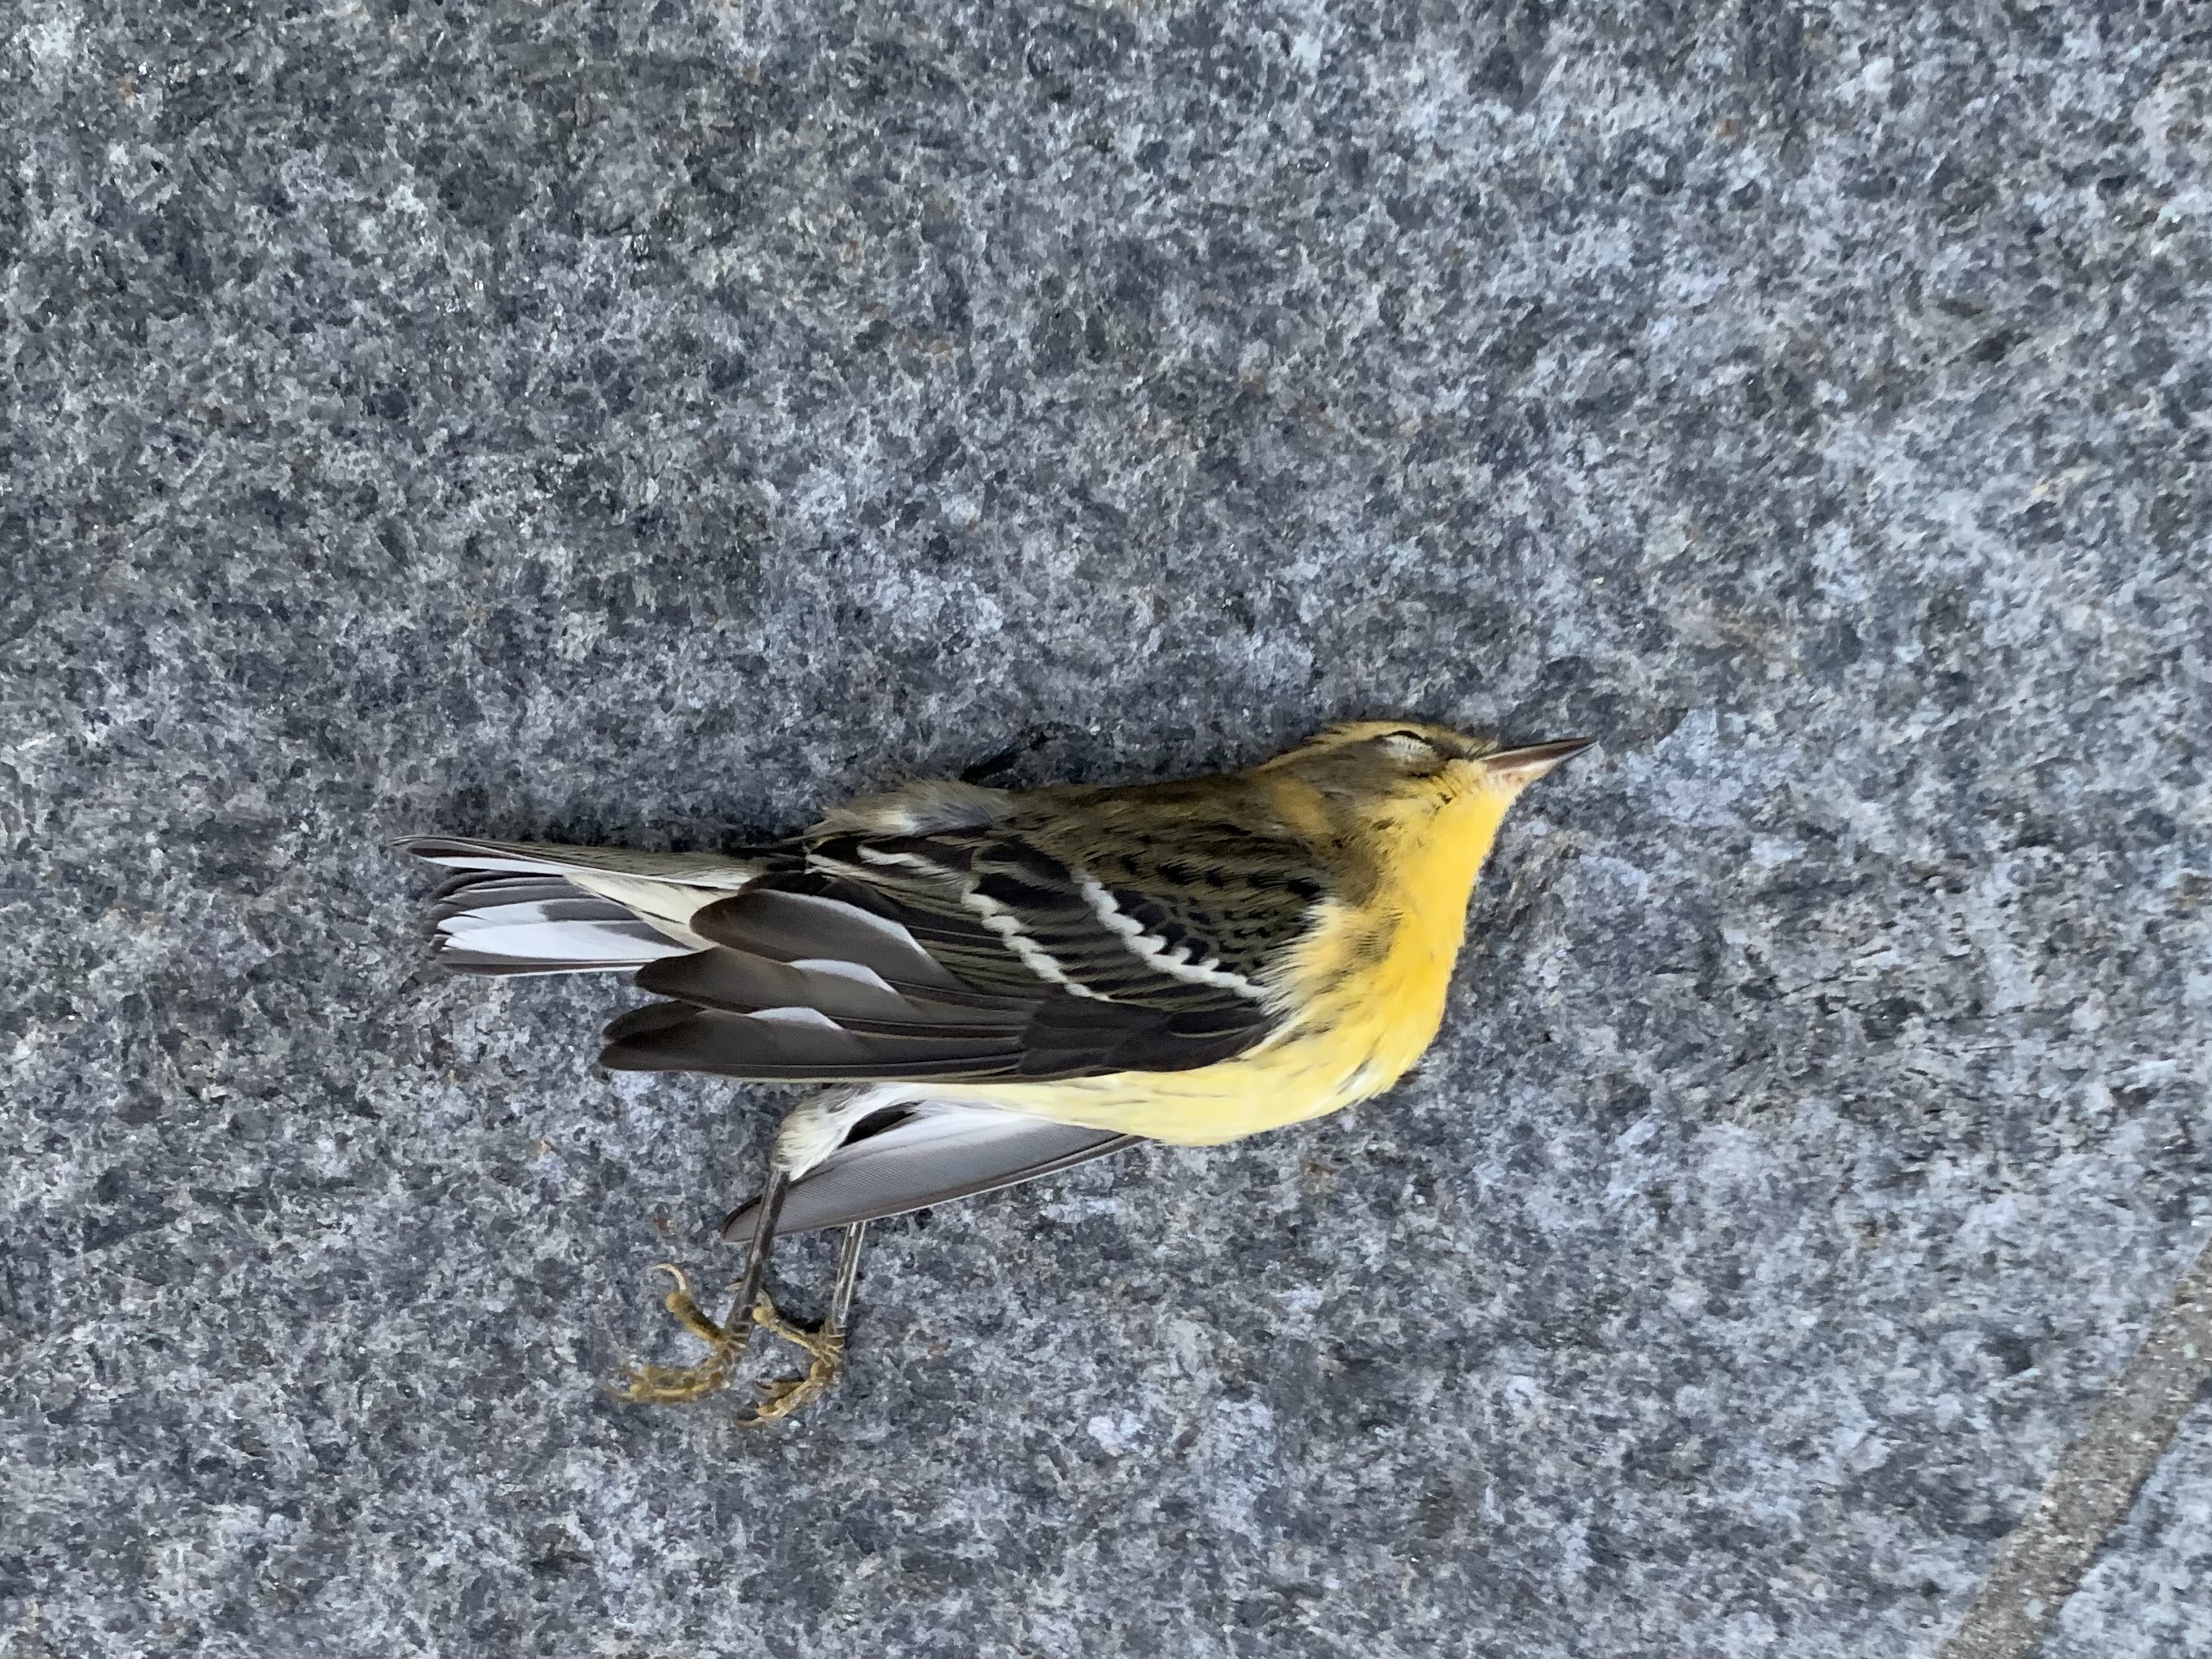 This female or young male Blackburnian Warbler, collected by Project Safe Flight volunteer Melissa Breyer, died from a window collision in the World Trade Center area on September 14, 2021. Photo: Melissa Breyer